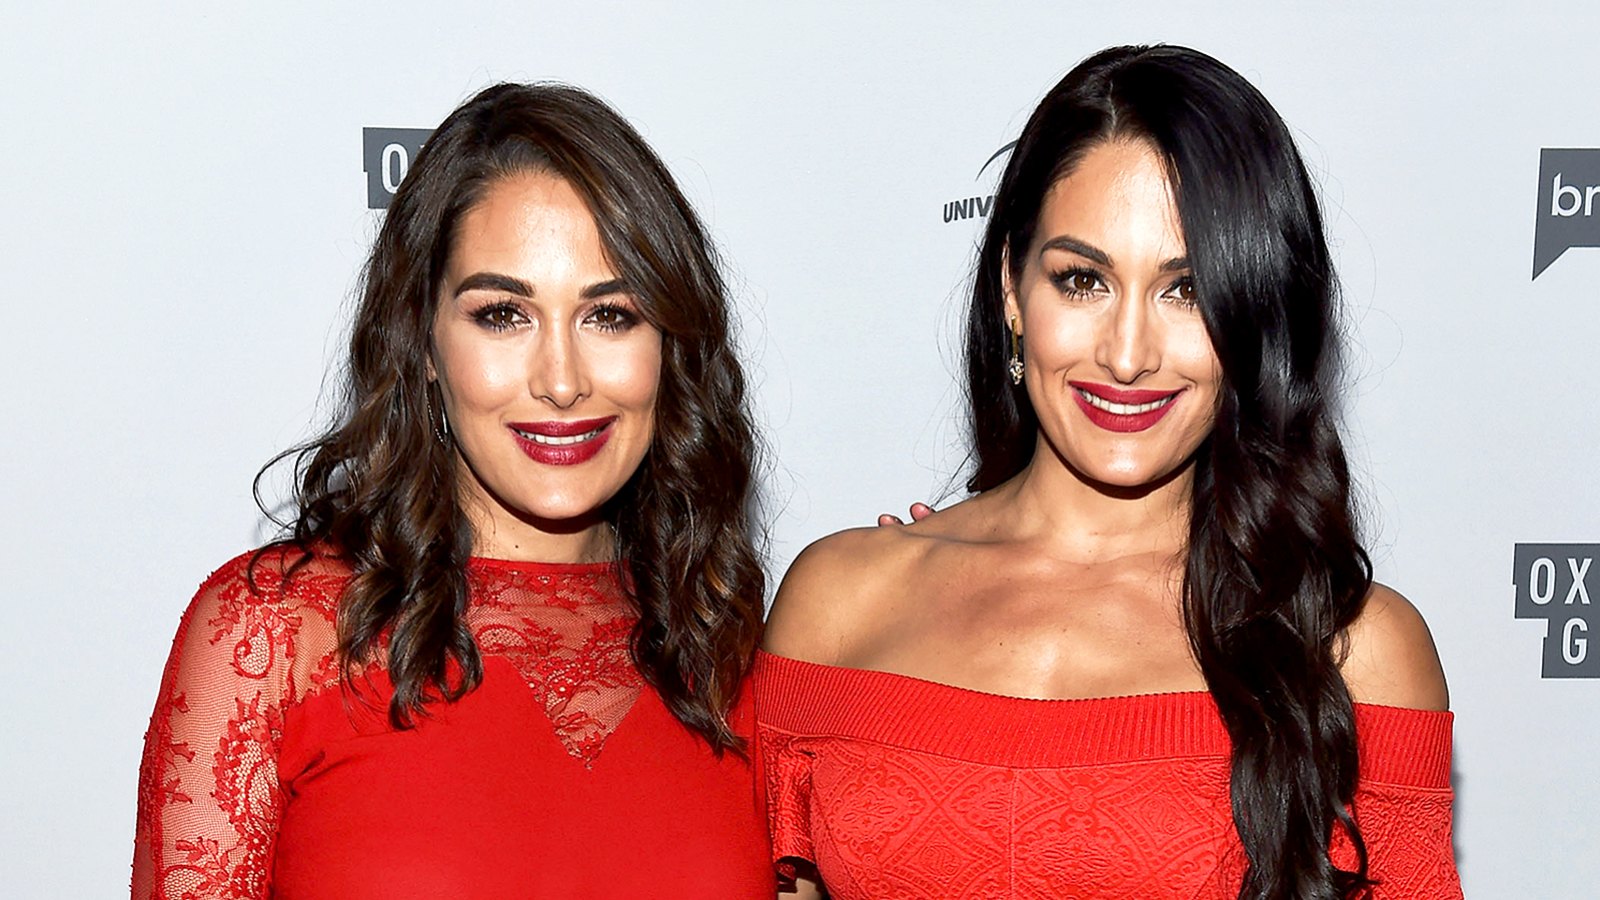 Brie Bella and Nikki Bella arrive at NBCUniversal's Press Junket at Beauty & Essex on November 13, 2017 in Los Angeles, California.